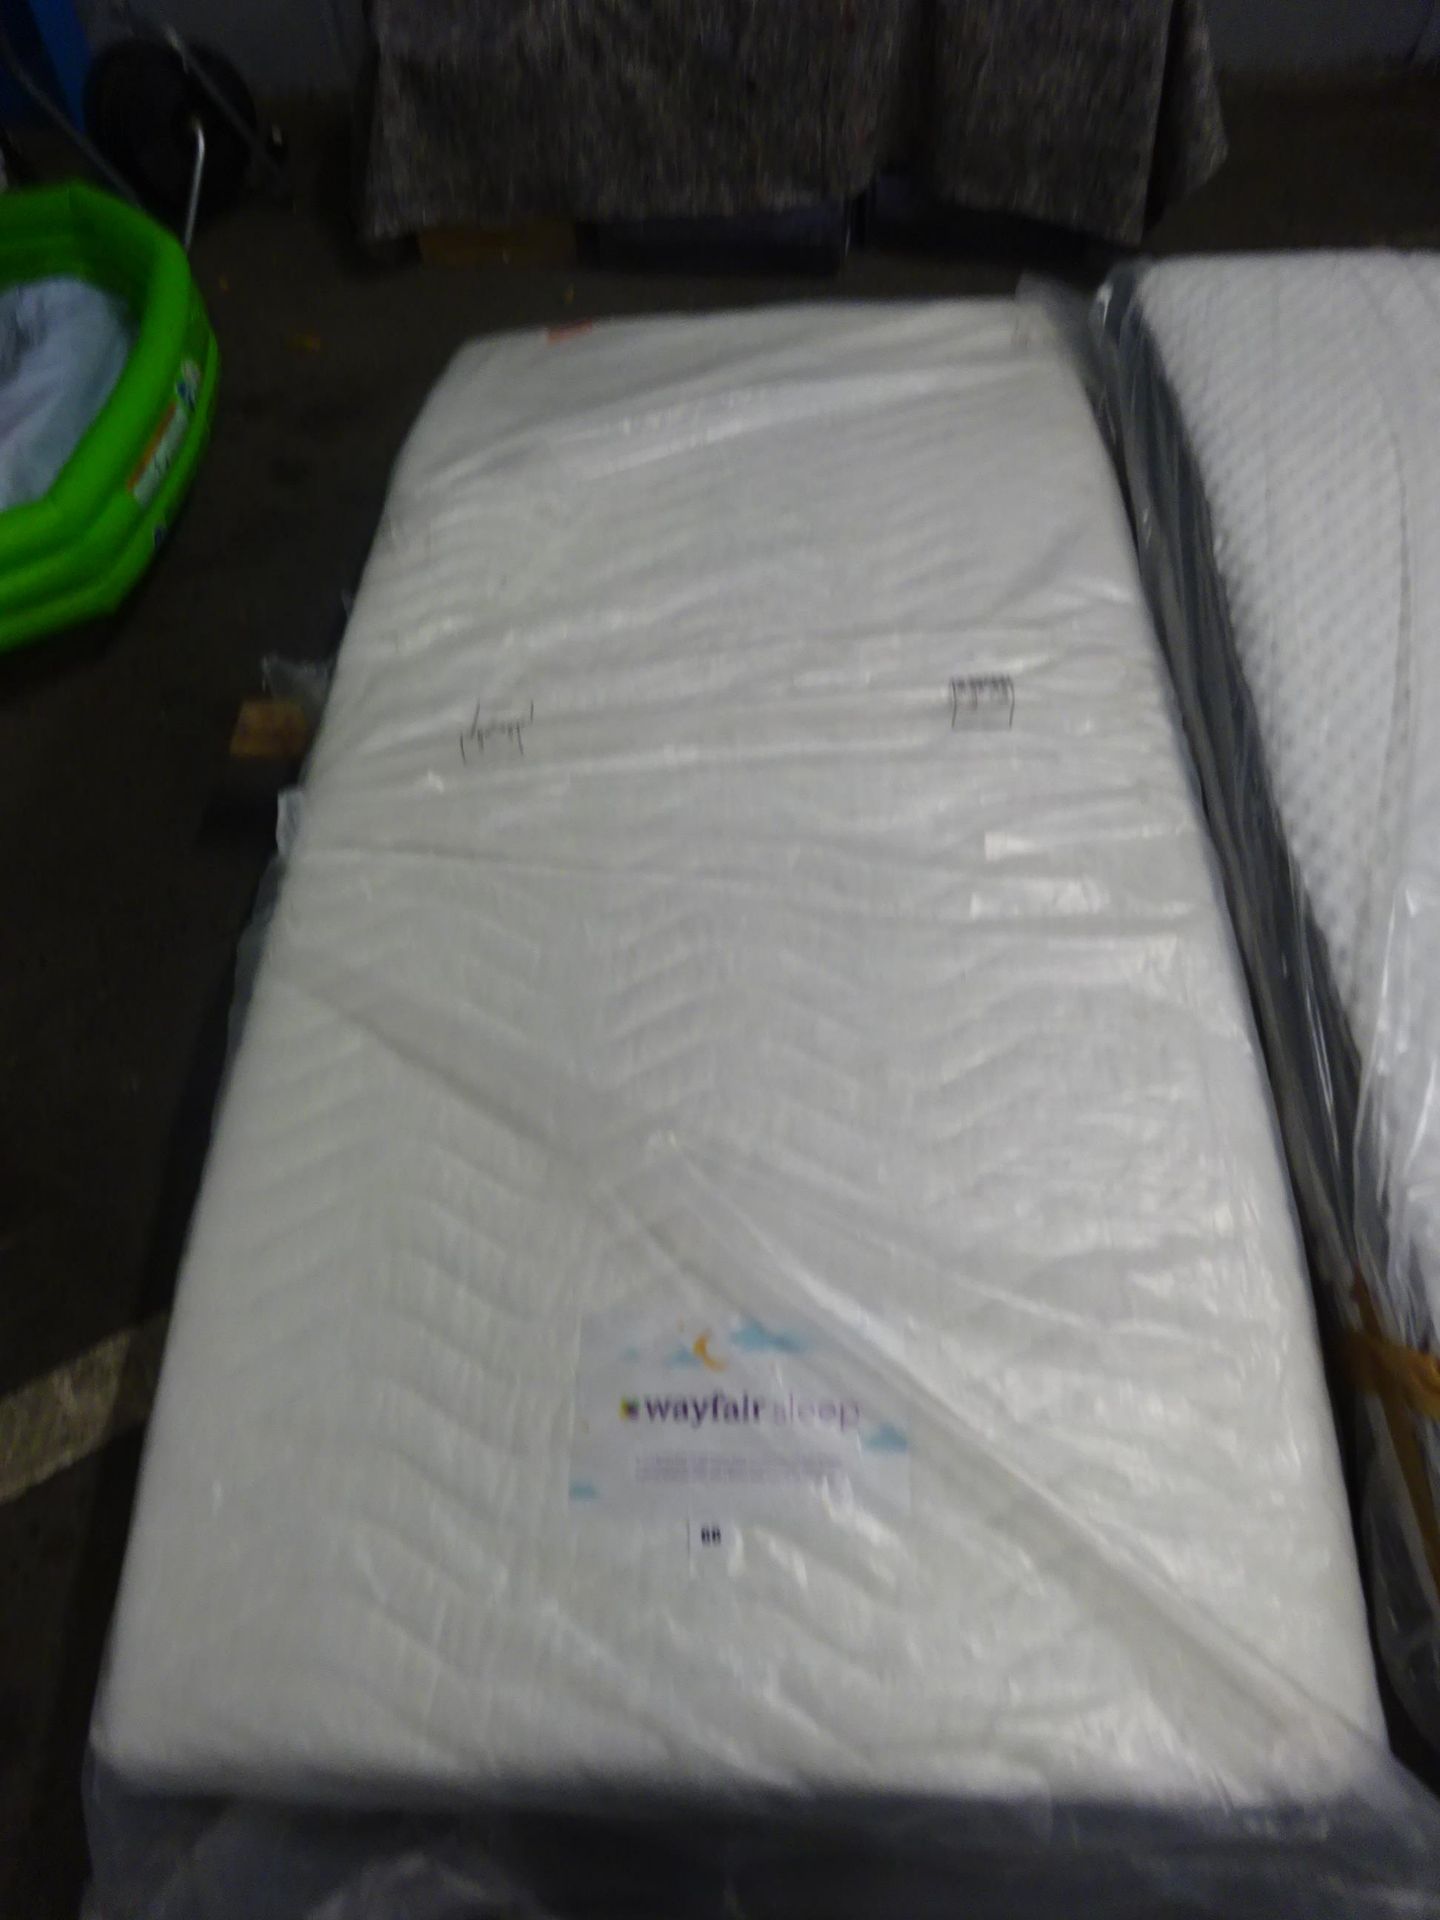 NEW WAYFAIR SINGLE MATTRESS - MAY BE MARKED OR DITY FROM DELIVERY - COLLECTION ONLY